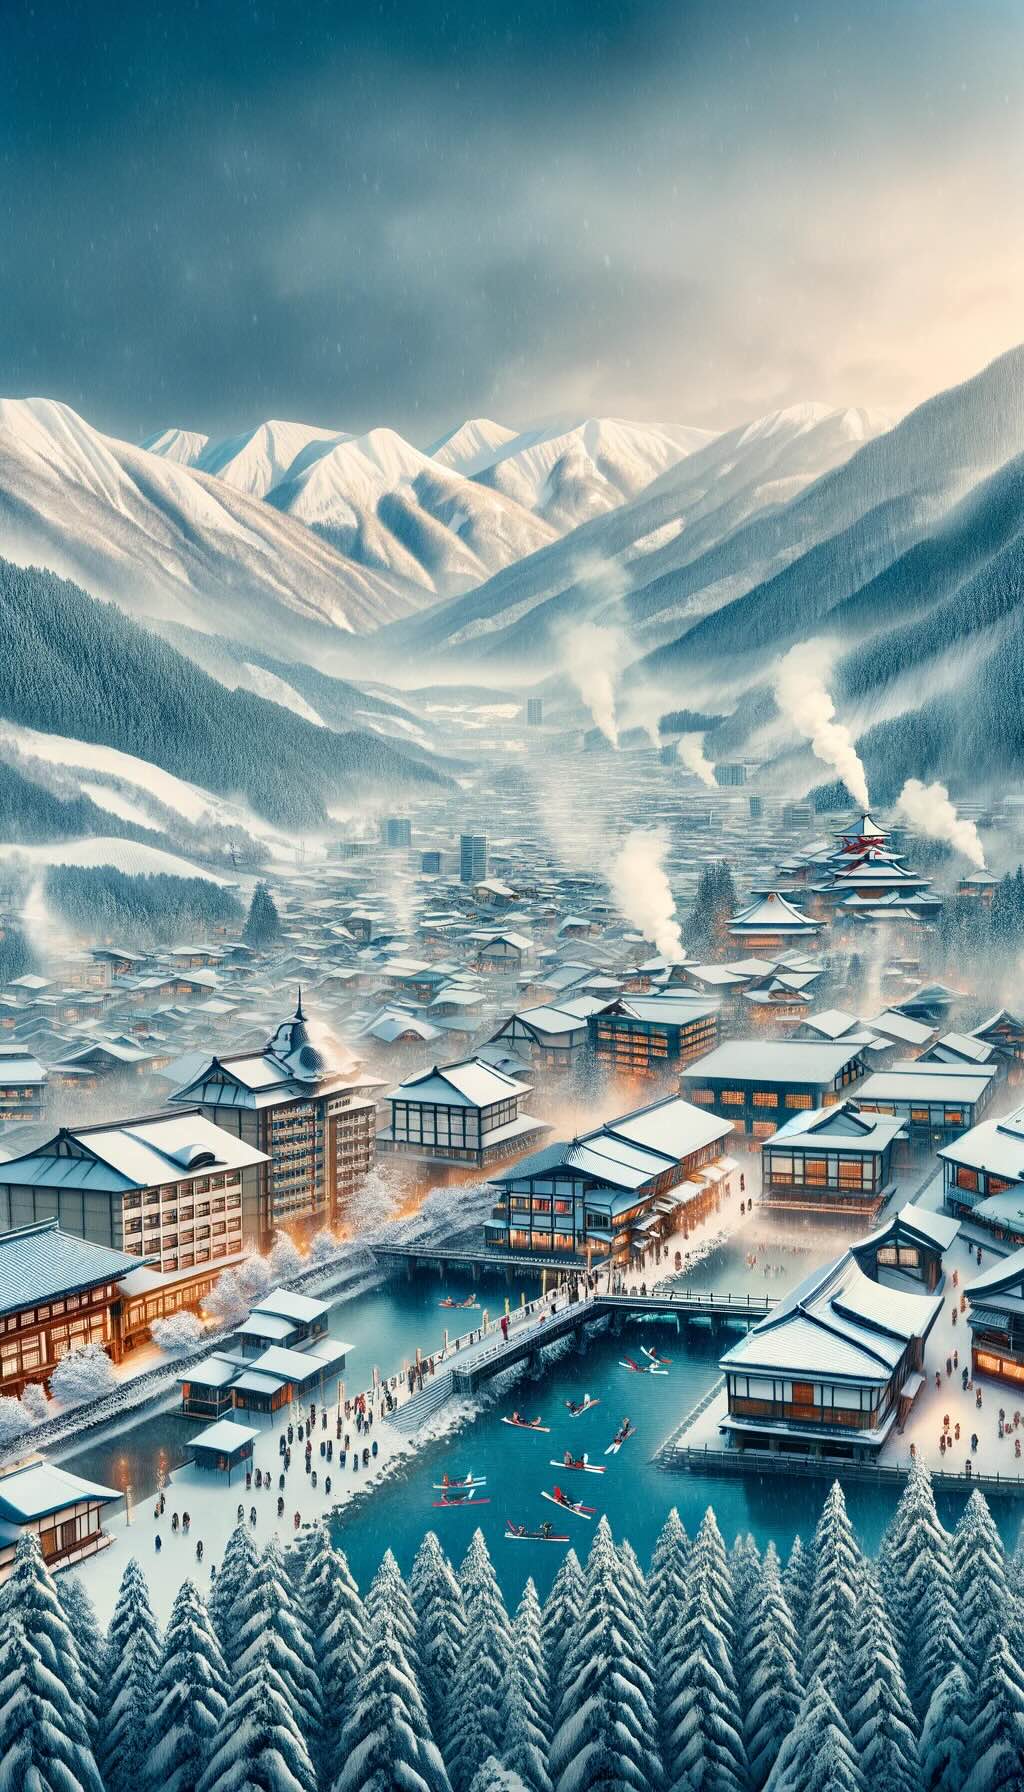 Representation of Nagano, Japan, during winter, showcasing its snow-covered mountains, traditional hot springs, and charming towns, embodying the essence of Nagano as a winter destination. 